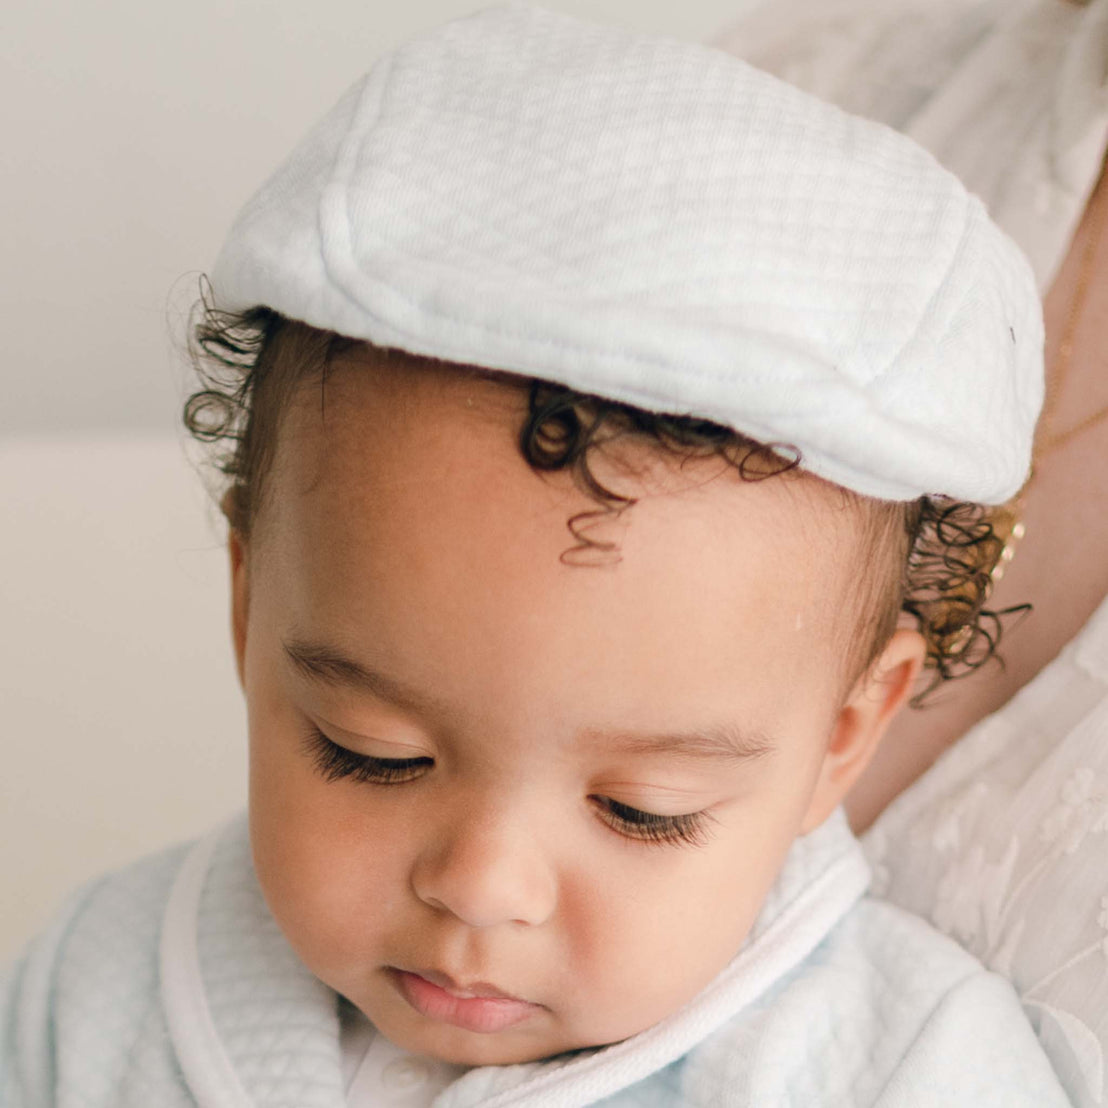 Baby boy wearing the blue Asher Quilted Newsboy Cap made from 100% Quilted Cotton with a soft elastic back.